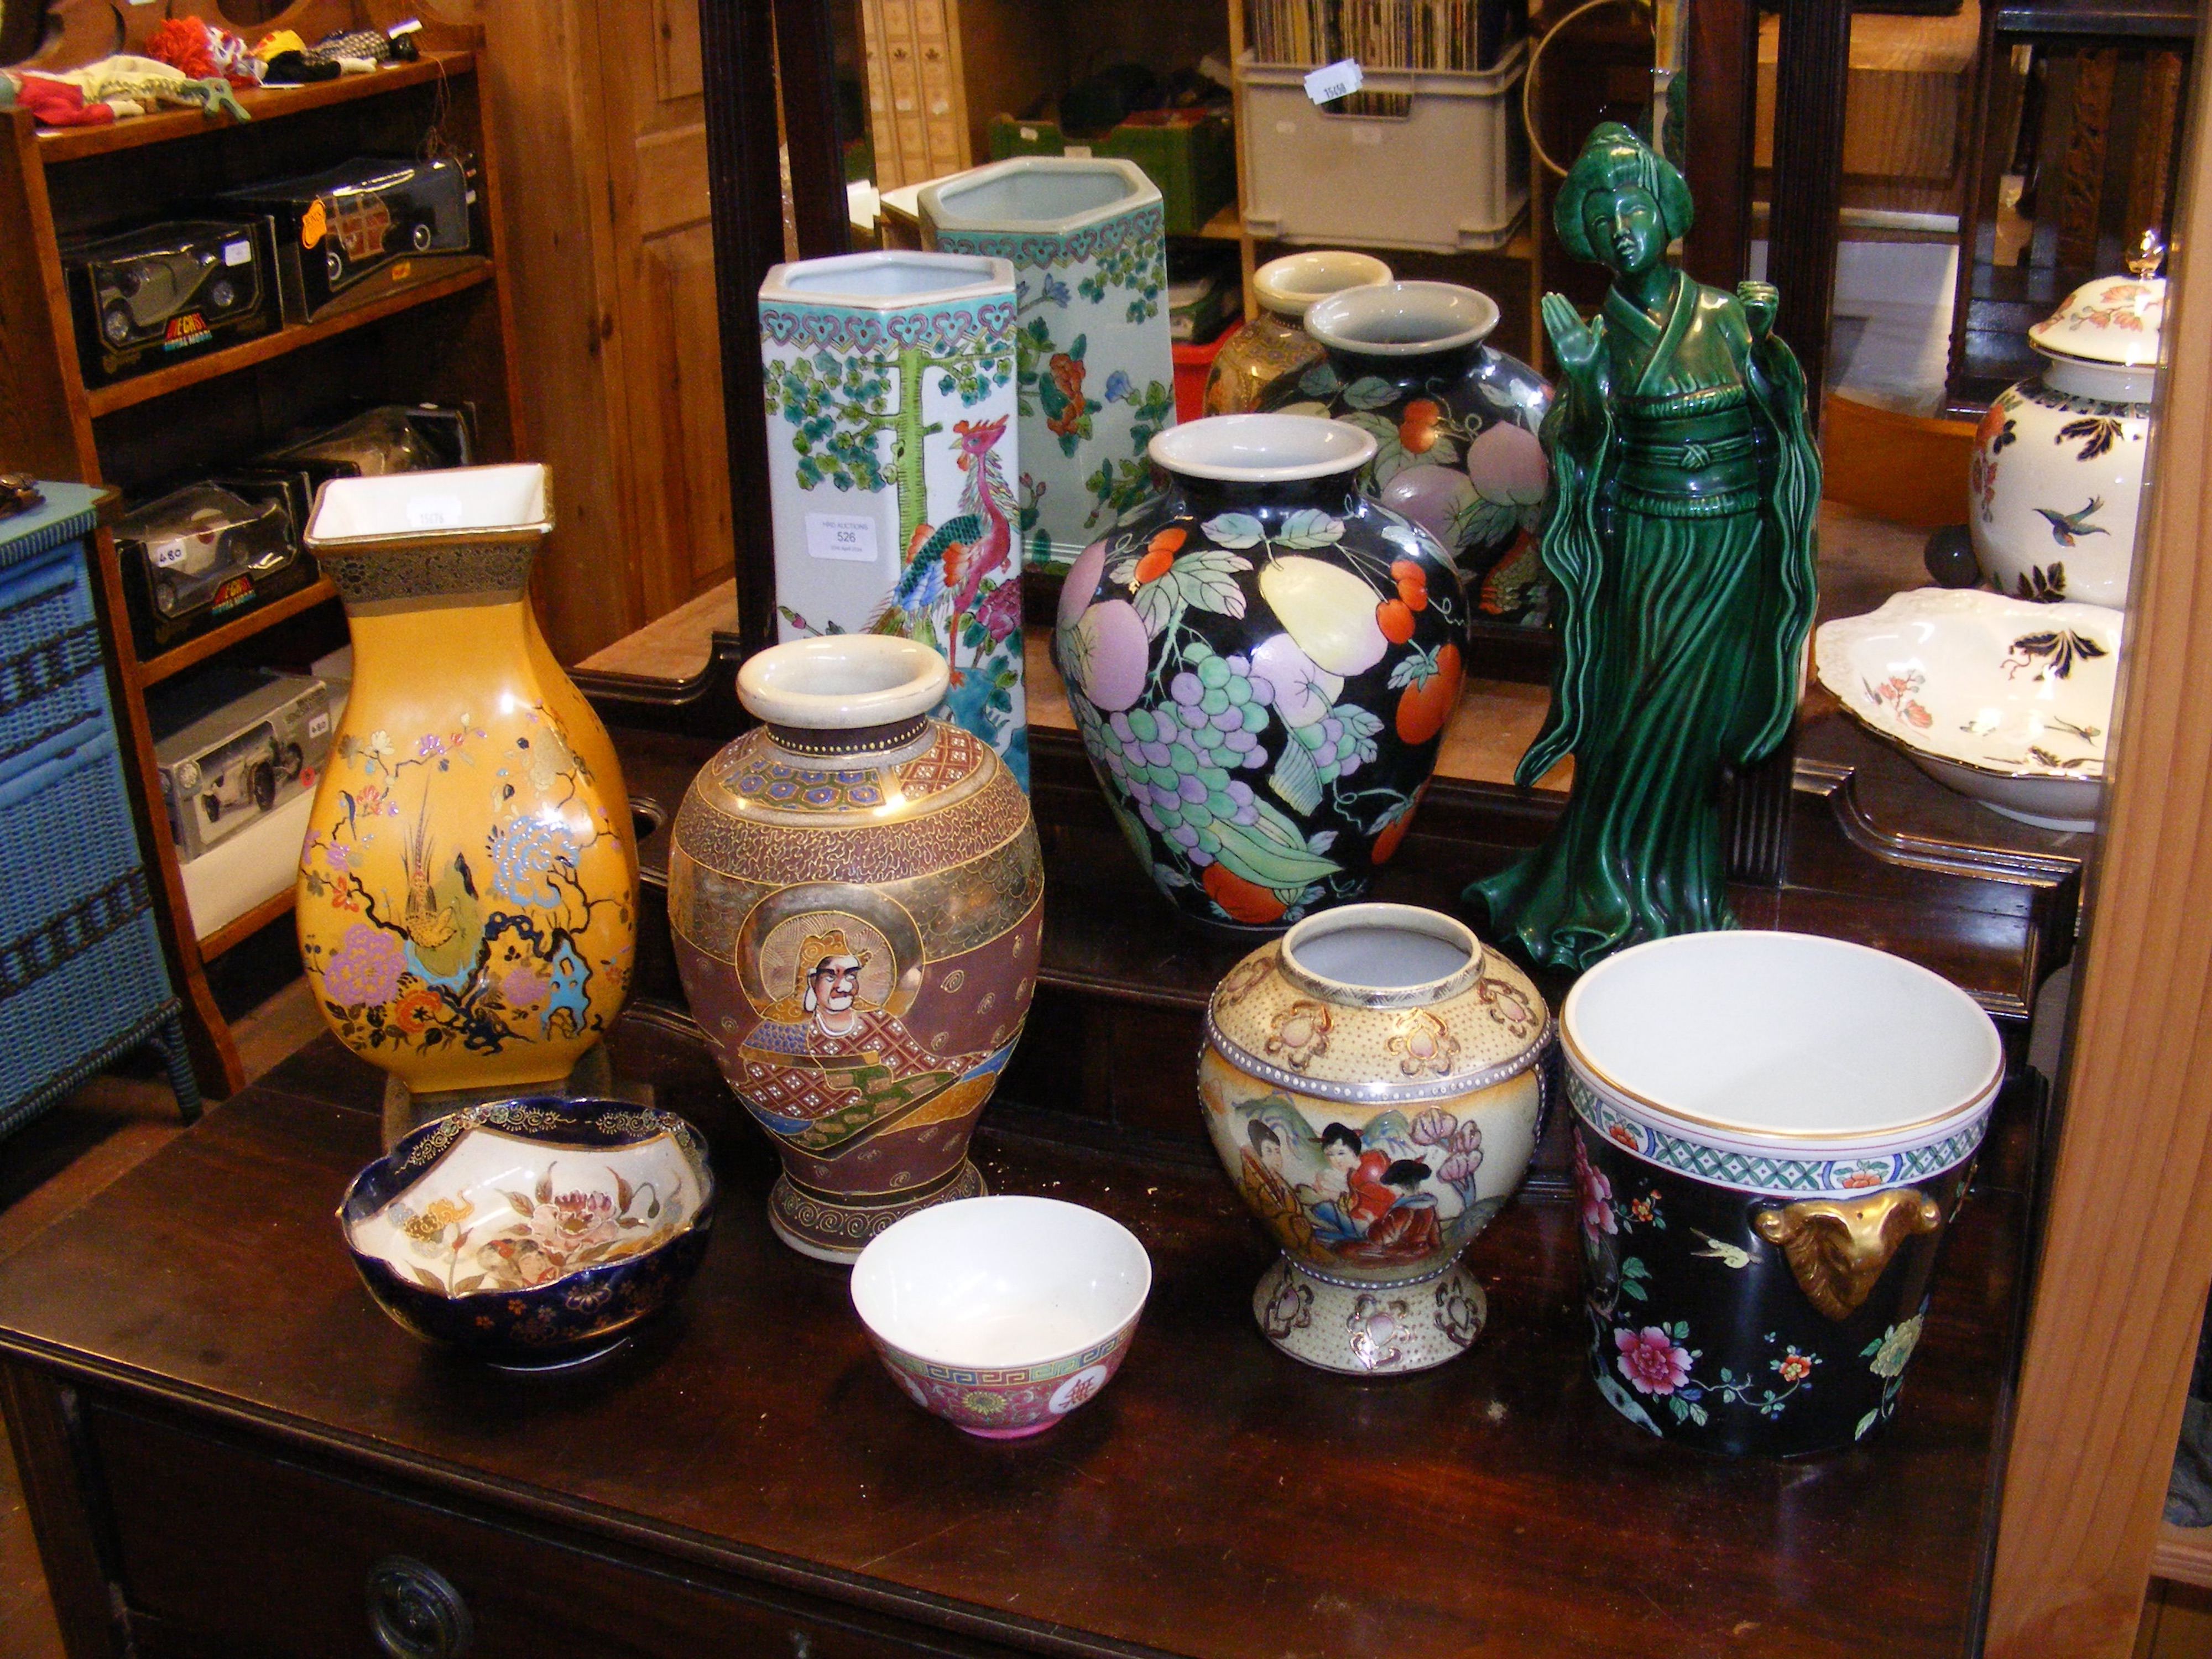 Oriental style vases and ornaments